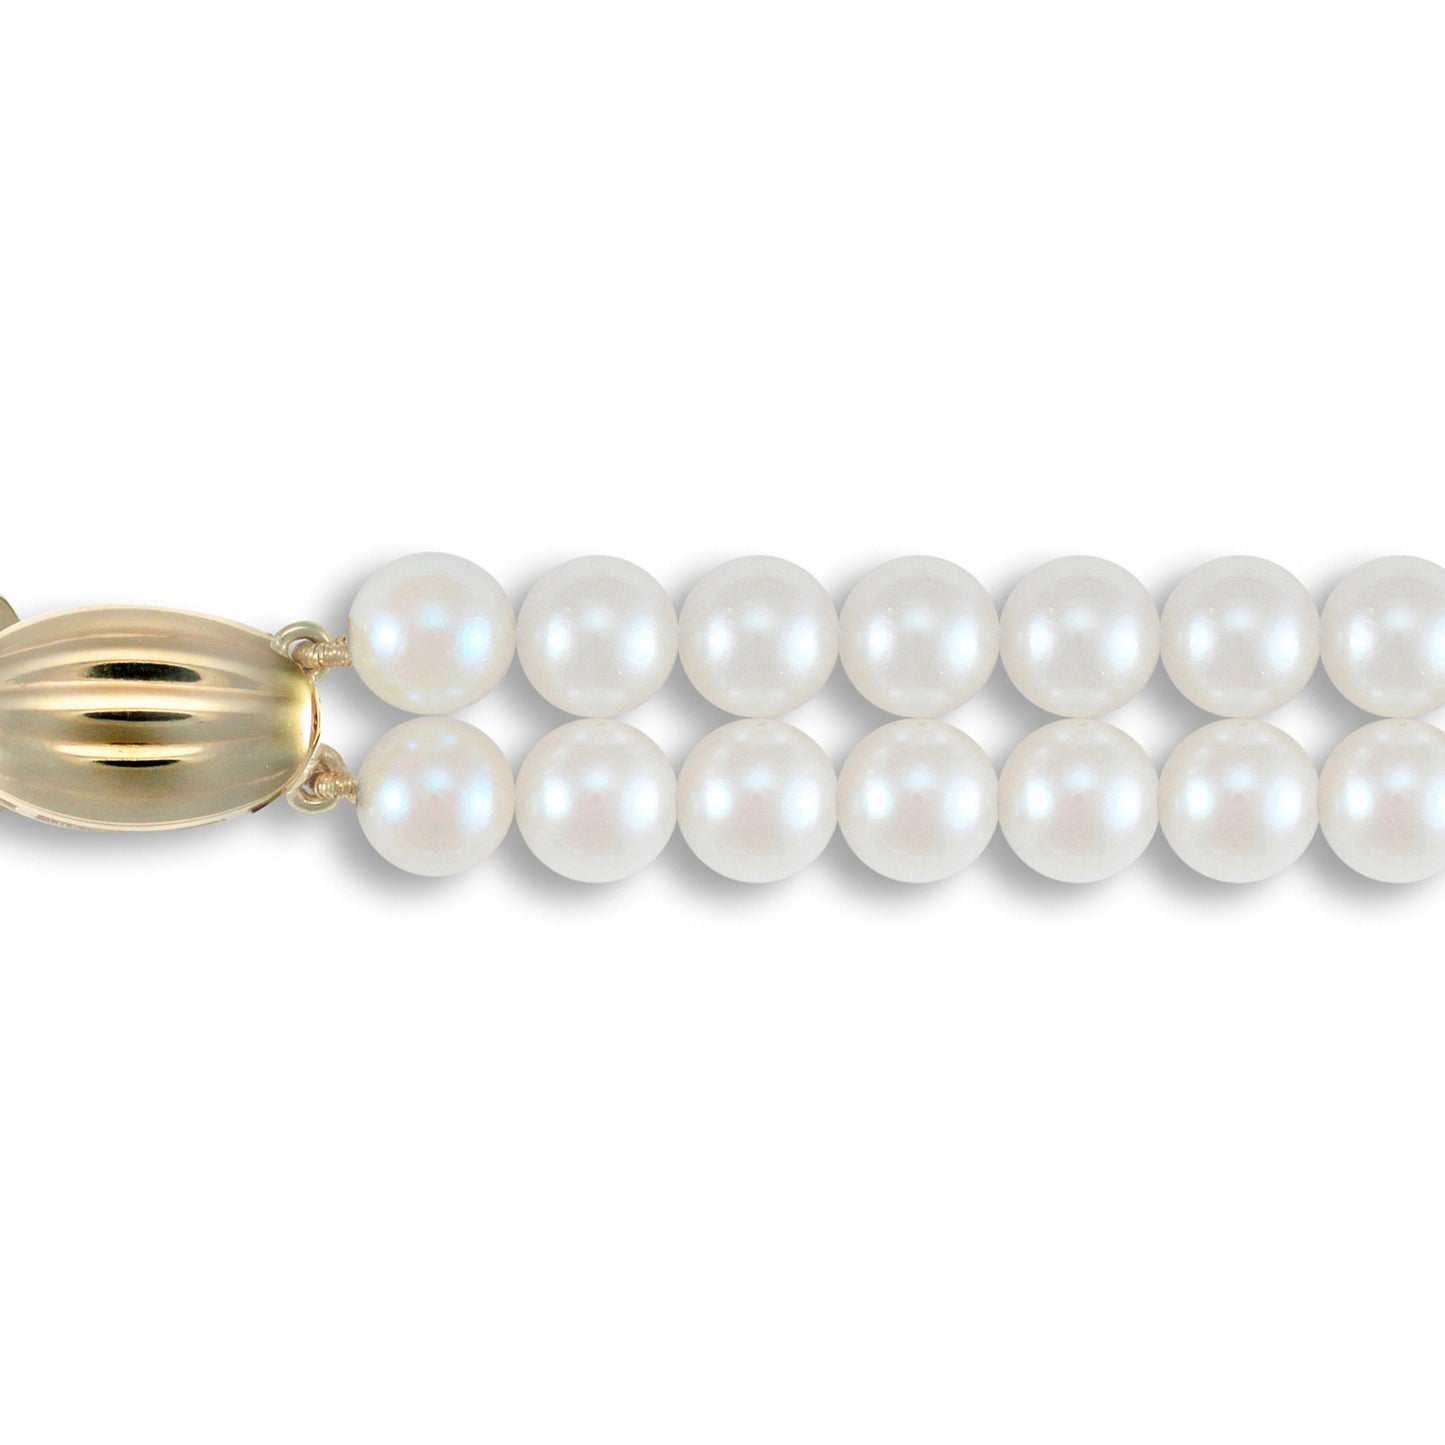 9ct Gold  Clasp Akoya Pearl Double Row Necklace 5.5-6mm - JBB342